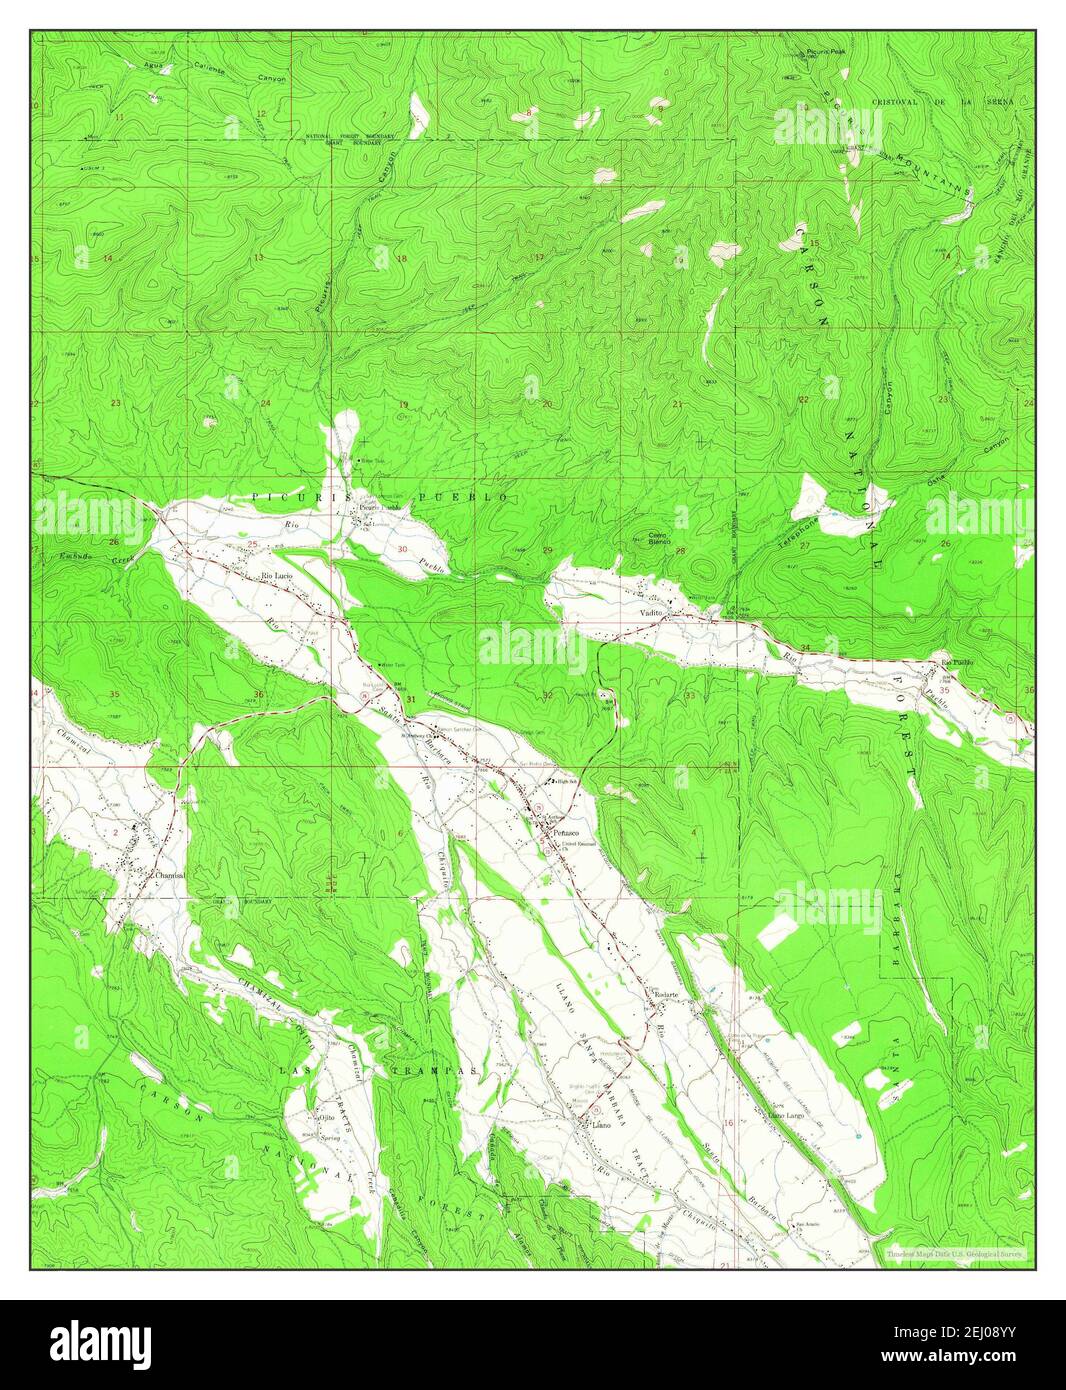 Penasco, New Mexico, map 1964, 1:24000, United States of America by Timeless Maps, data U.S. Geological Survey Stock Photo